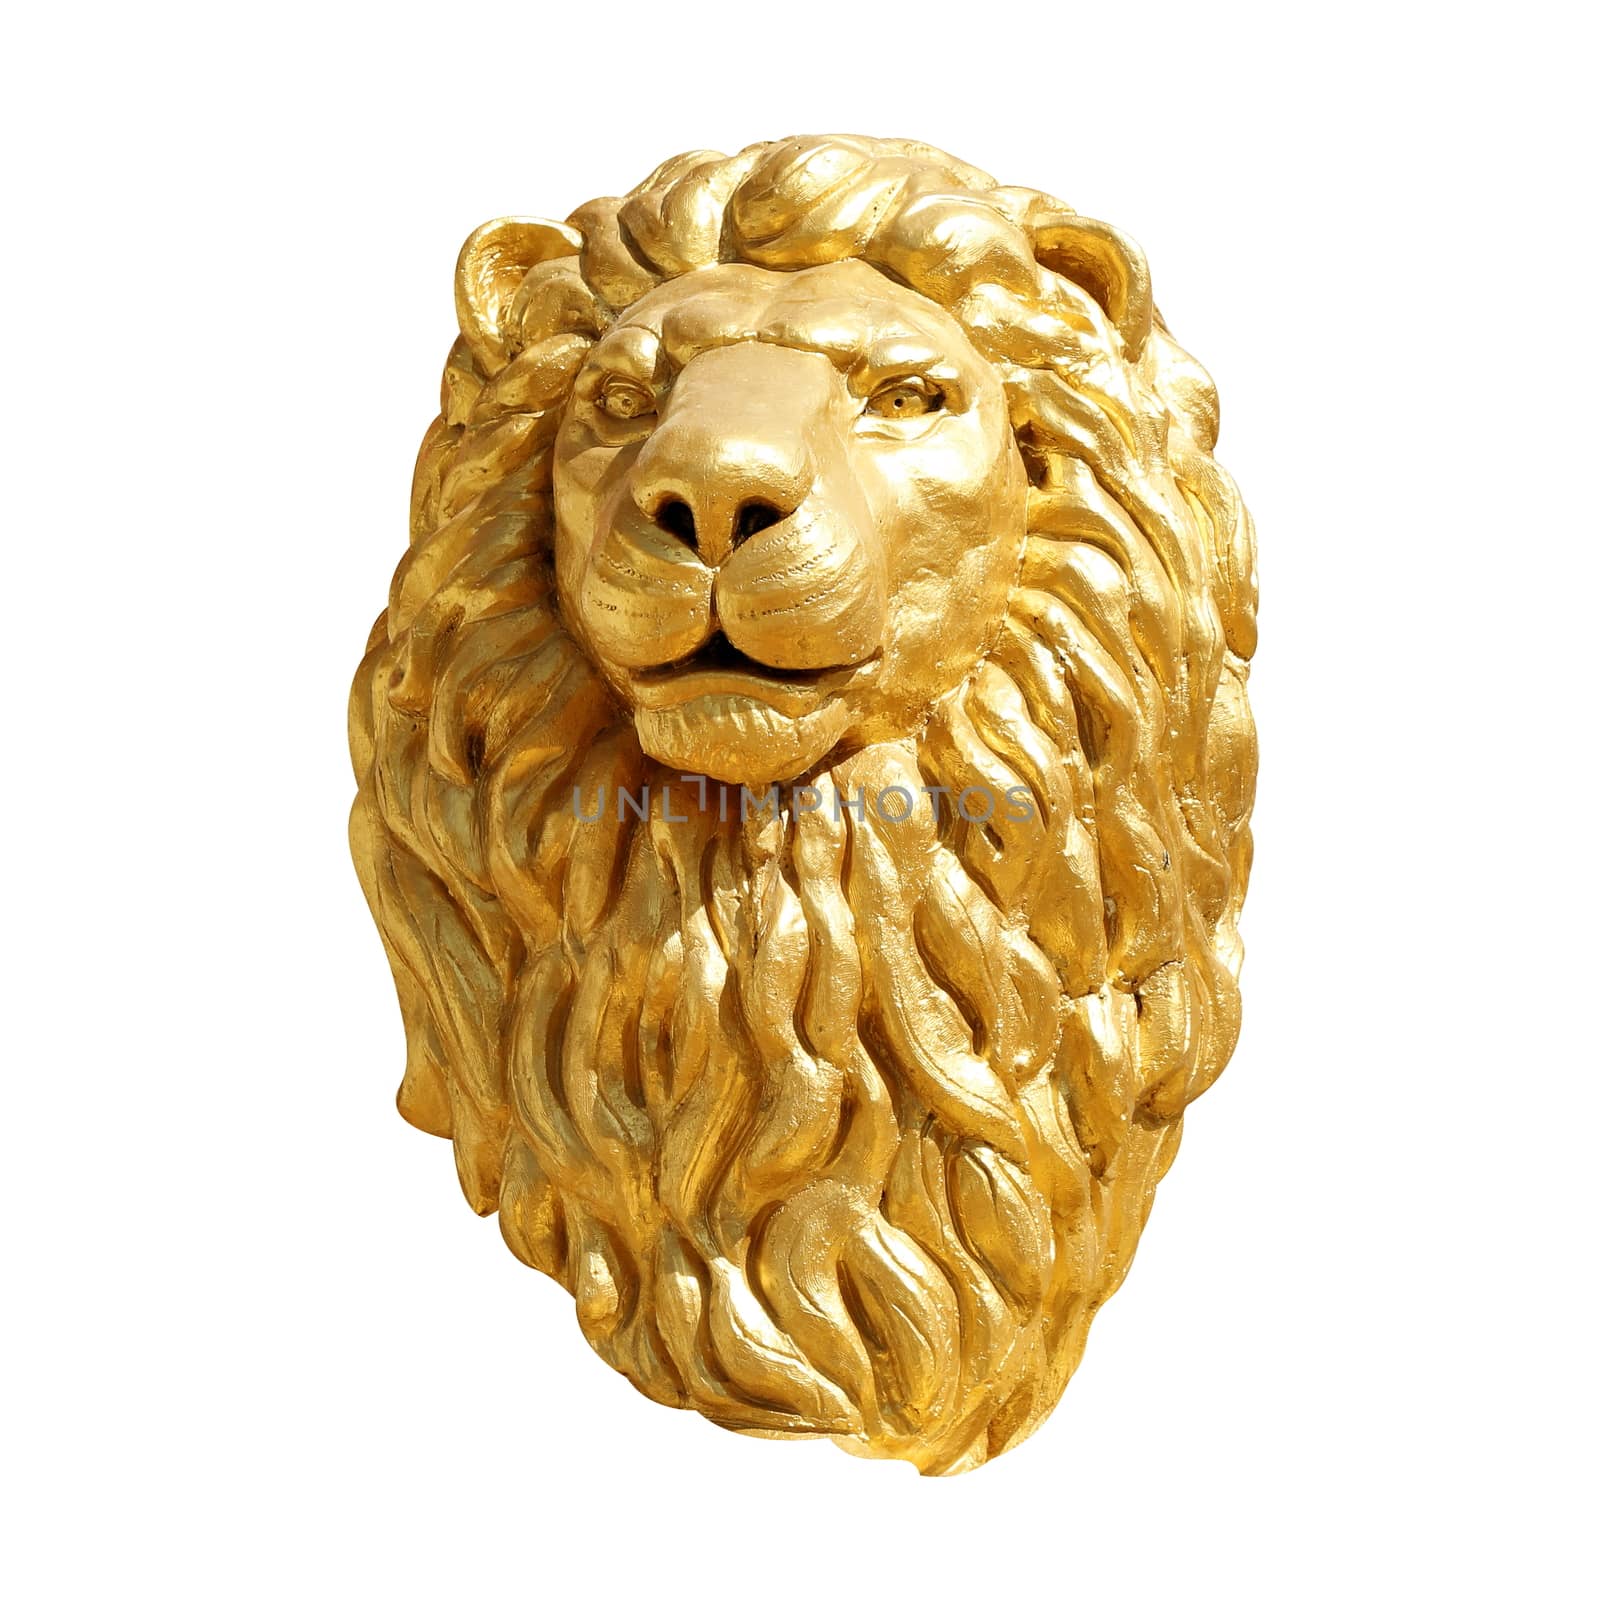 Lion Head gold, Golden Lion Head face Statue isolated on white background by cgdeaw